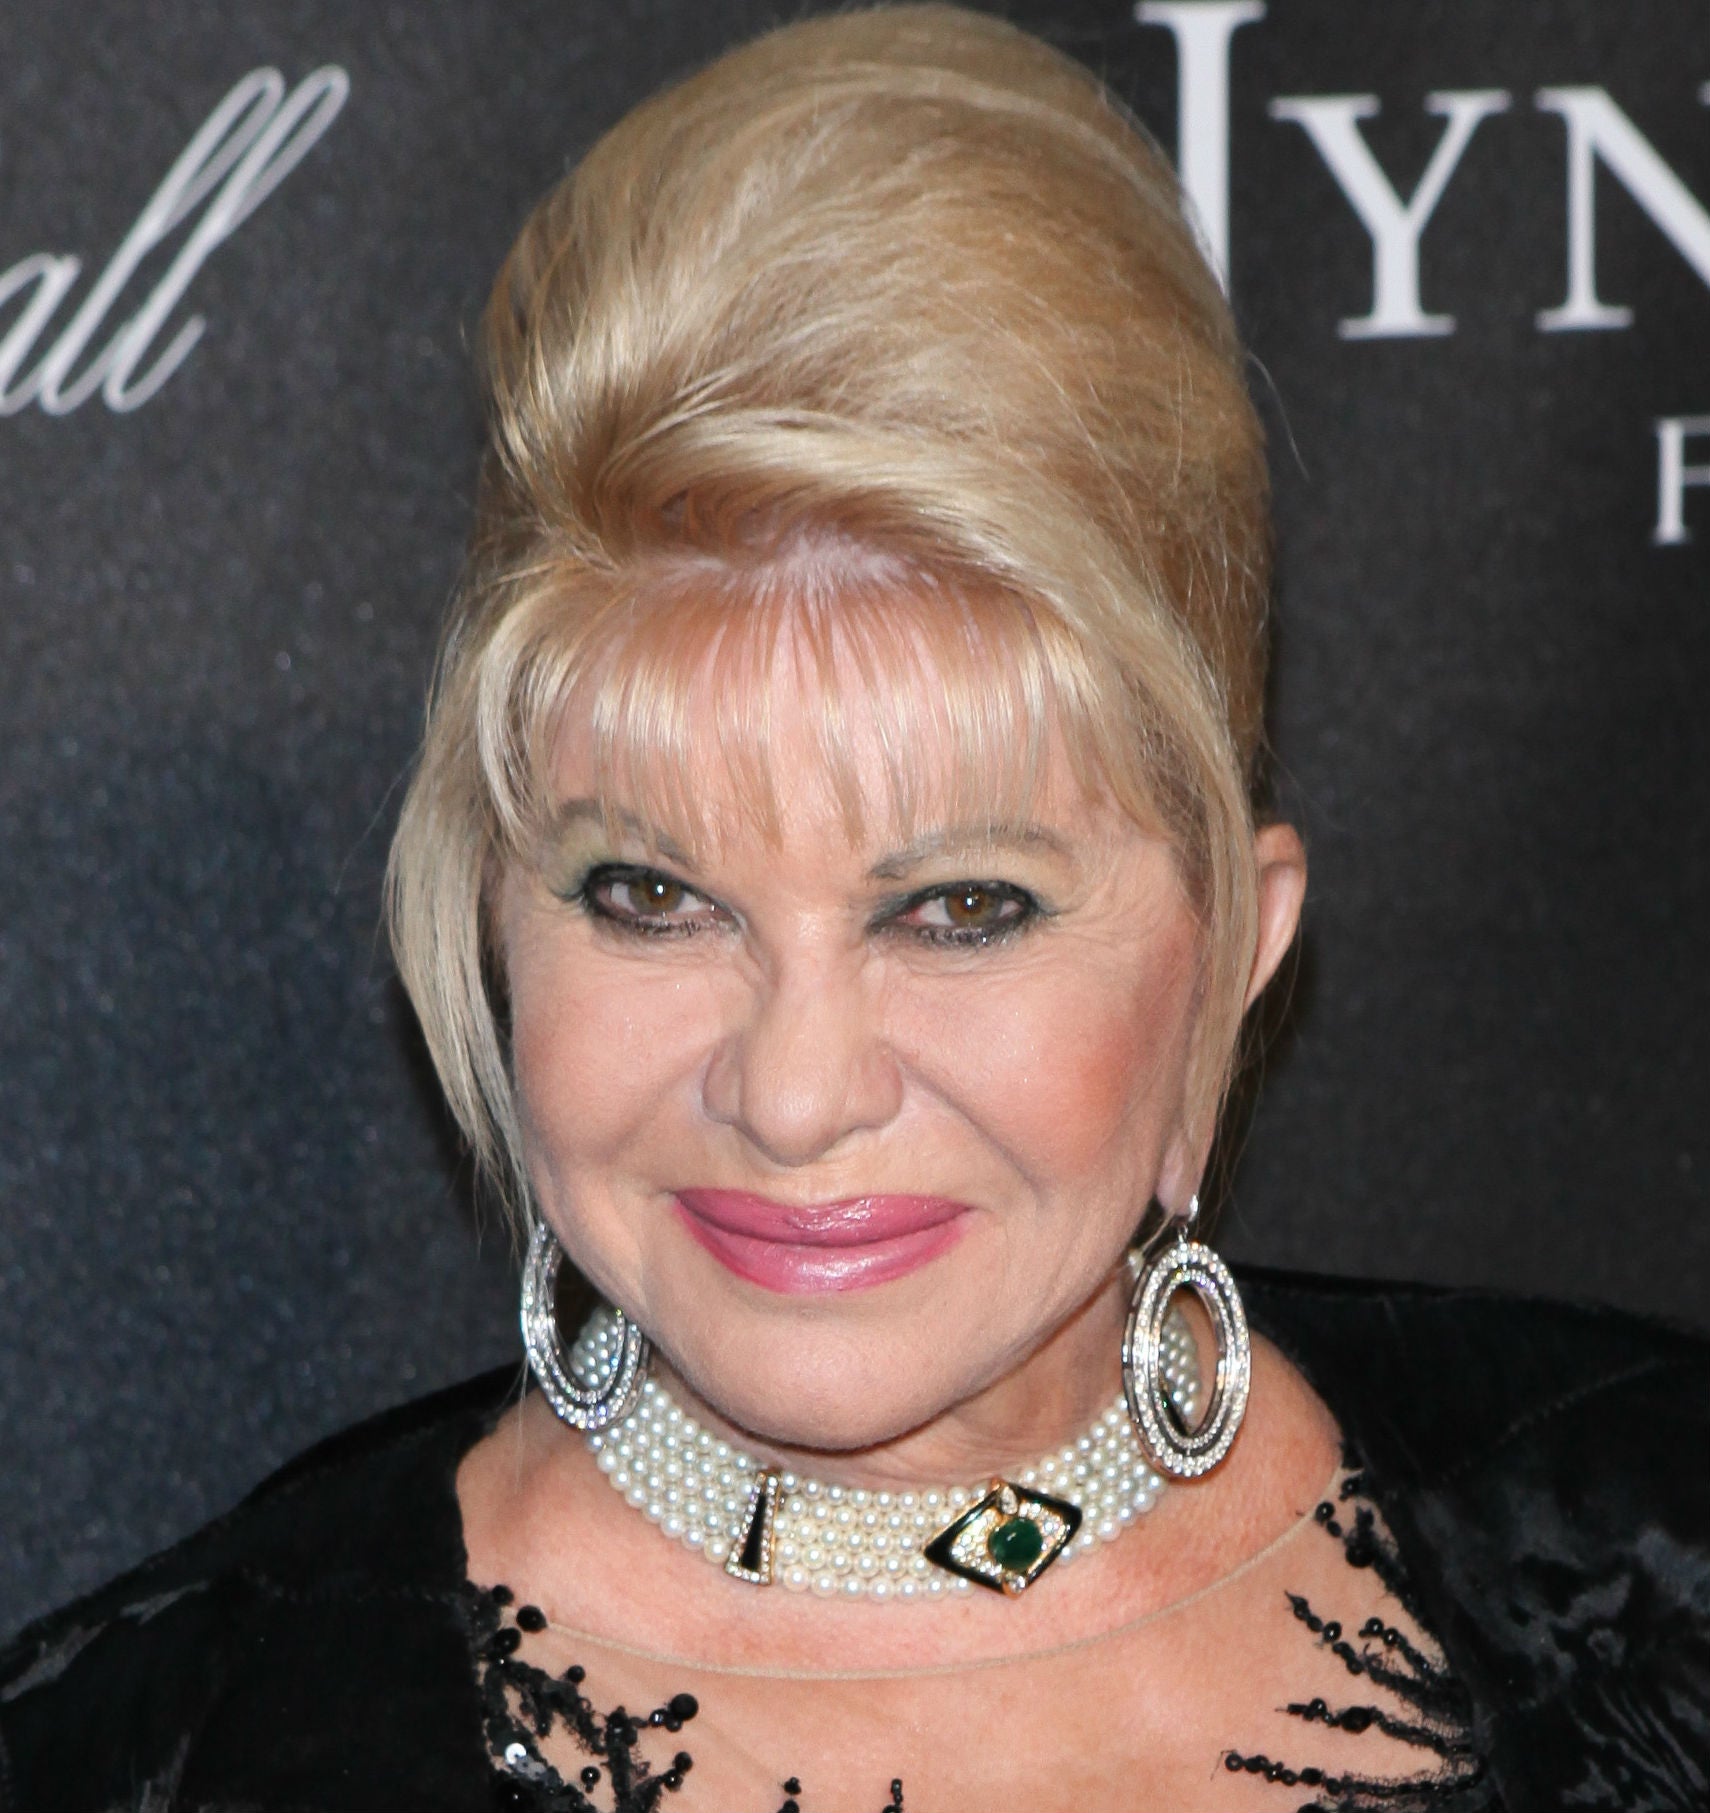 Ivana Trump says Donald Trump gave her a 'chance' when she was 'poor'